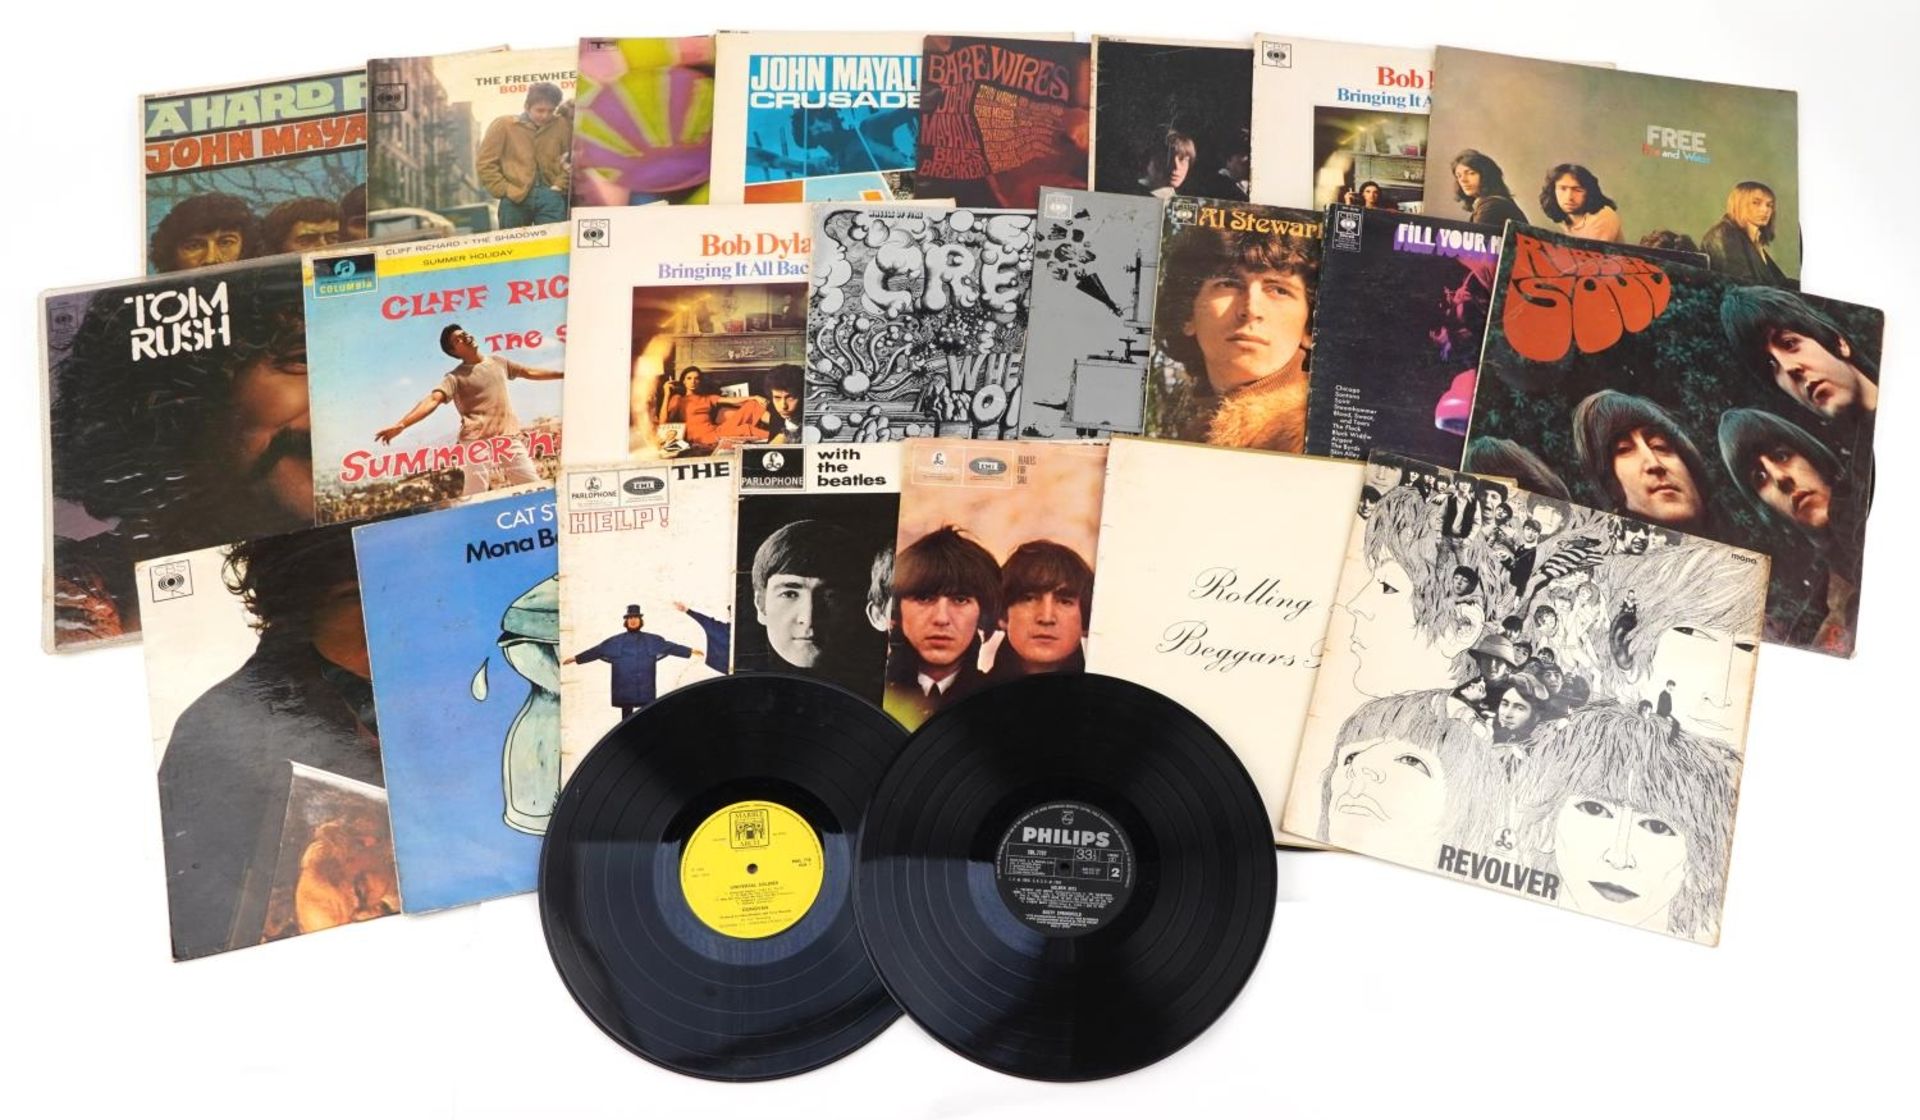 Vinyl LP records including Bob Dylan, John Mayall, The Rolling Stones, Cat Stevens, The Beatles - Image 2 of 7